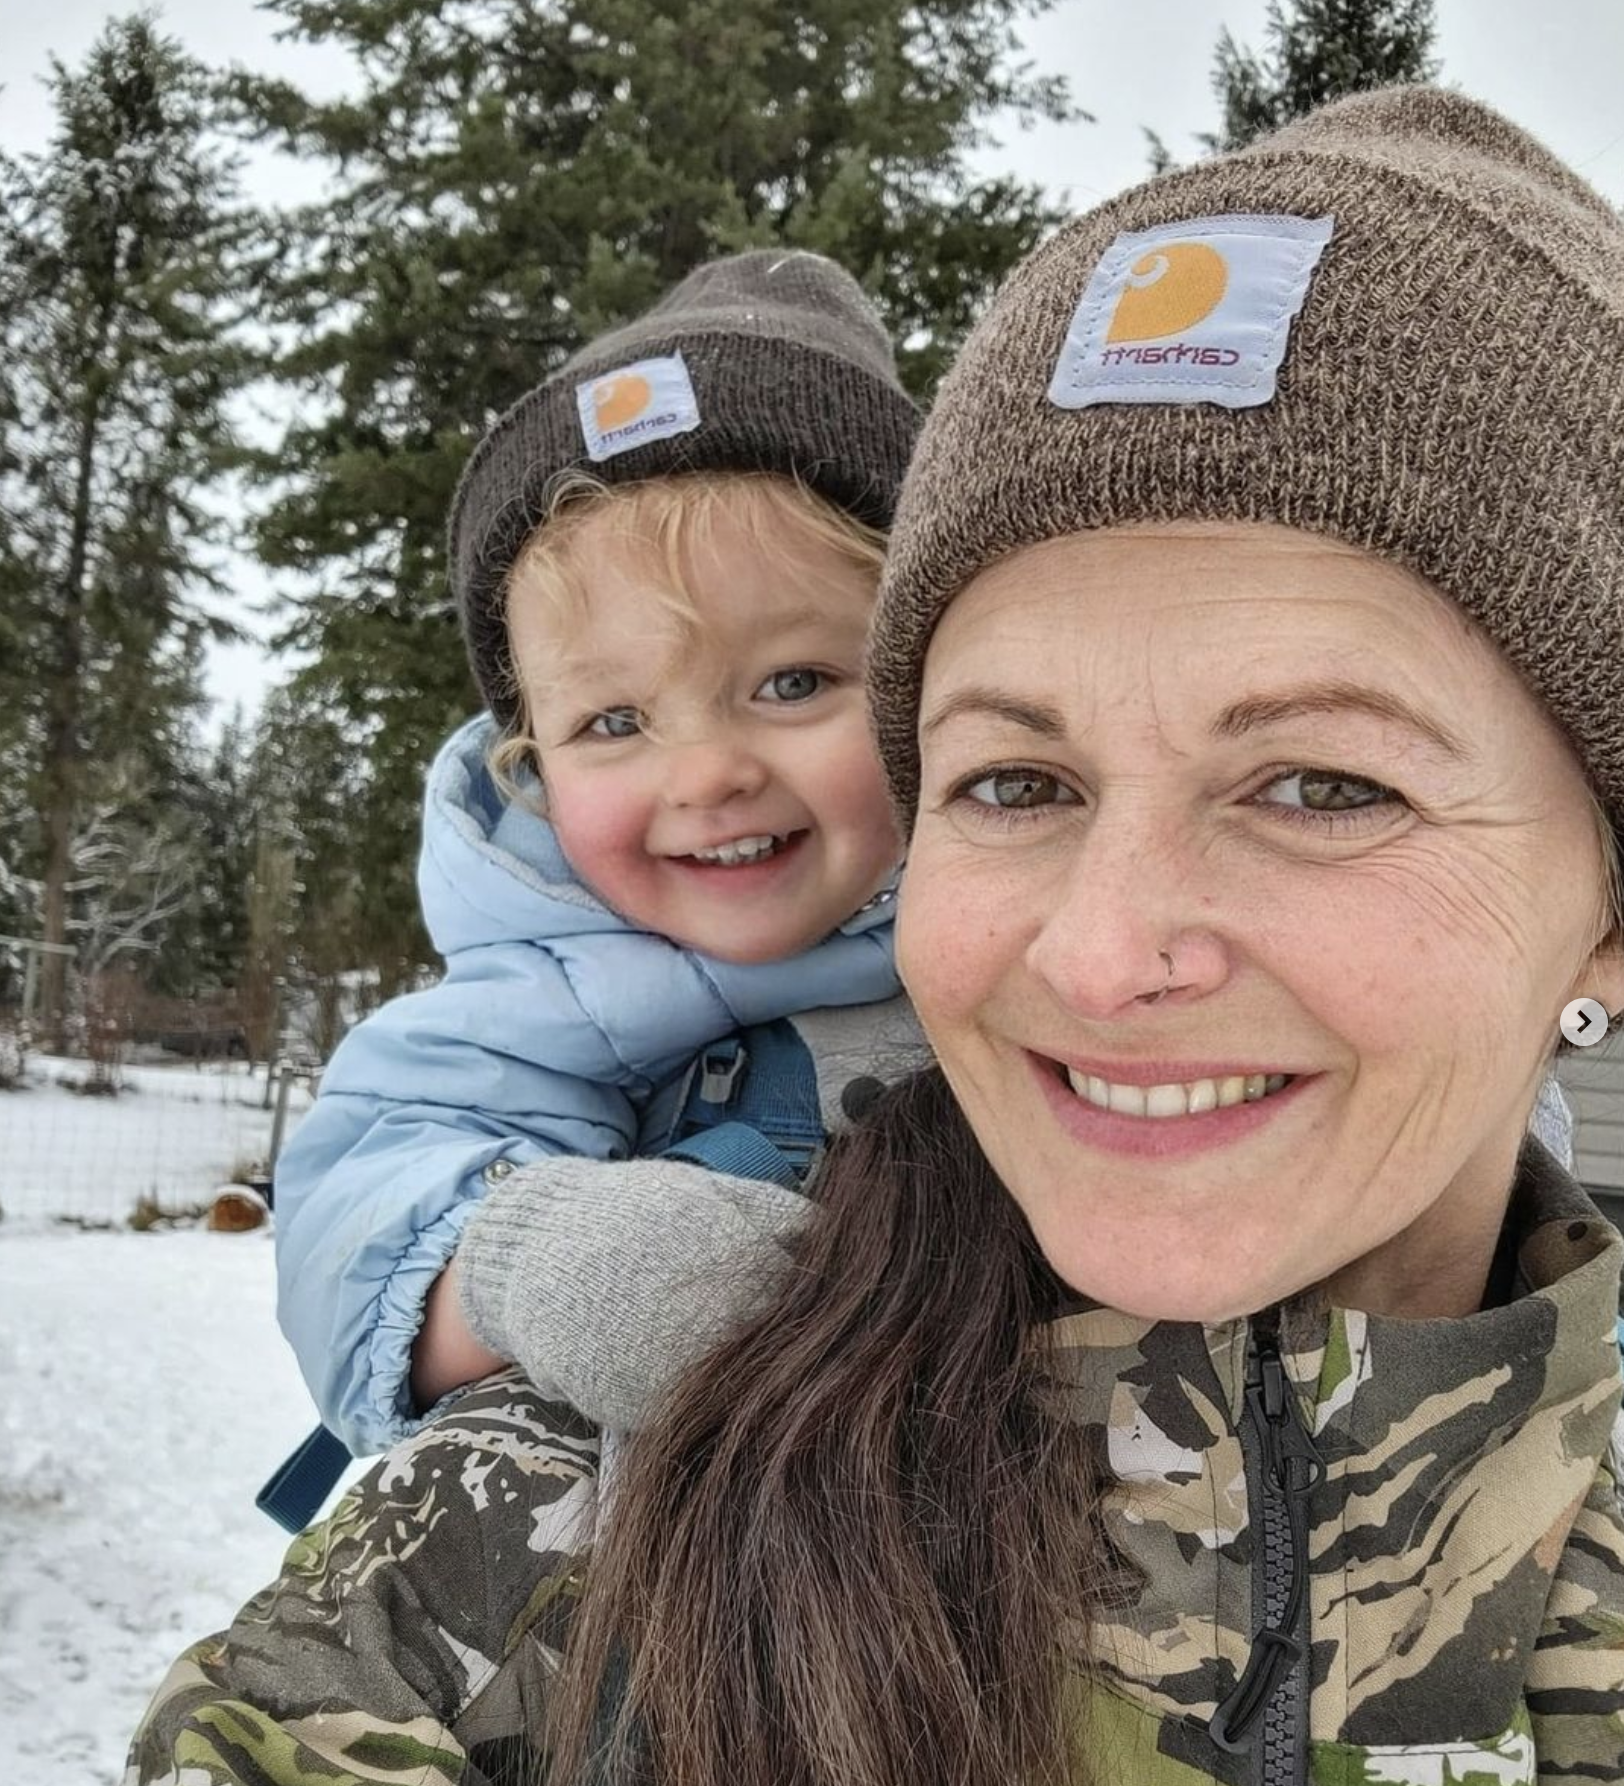 The trend of hunting mamas has been amplified by social media, but moms have always gone hunting and taken their children.